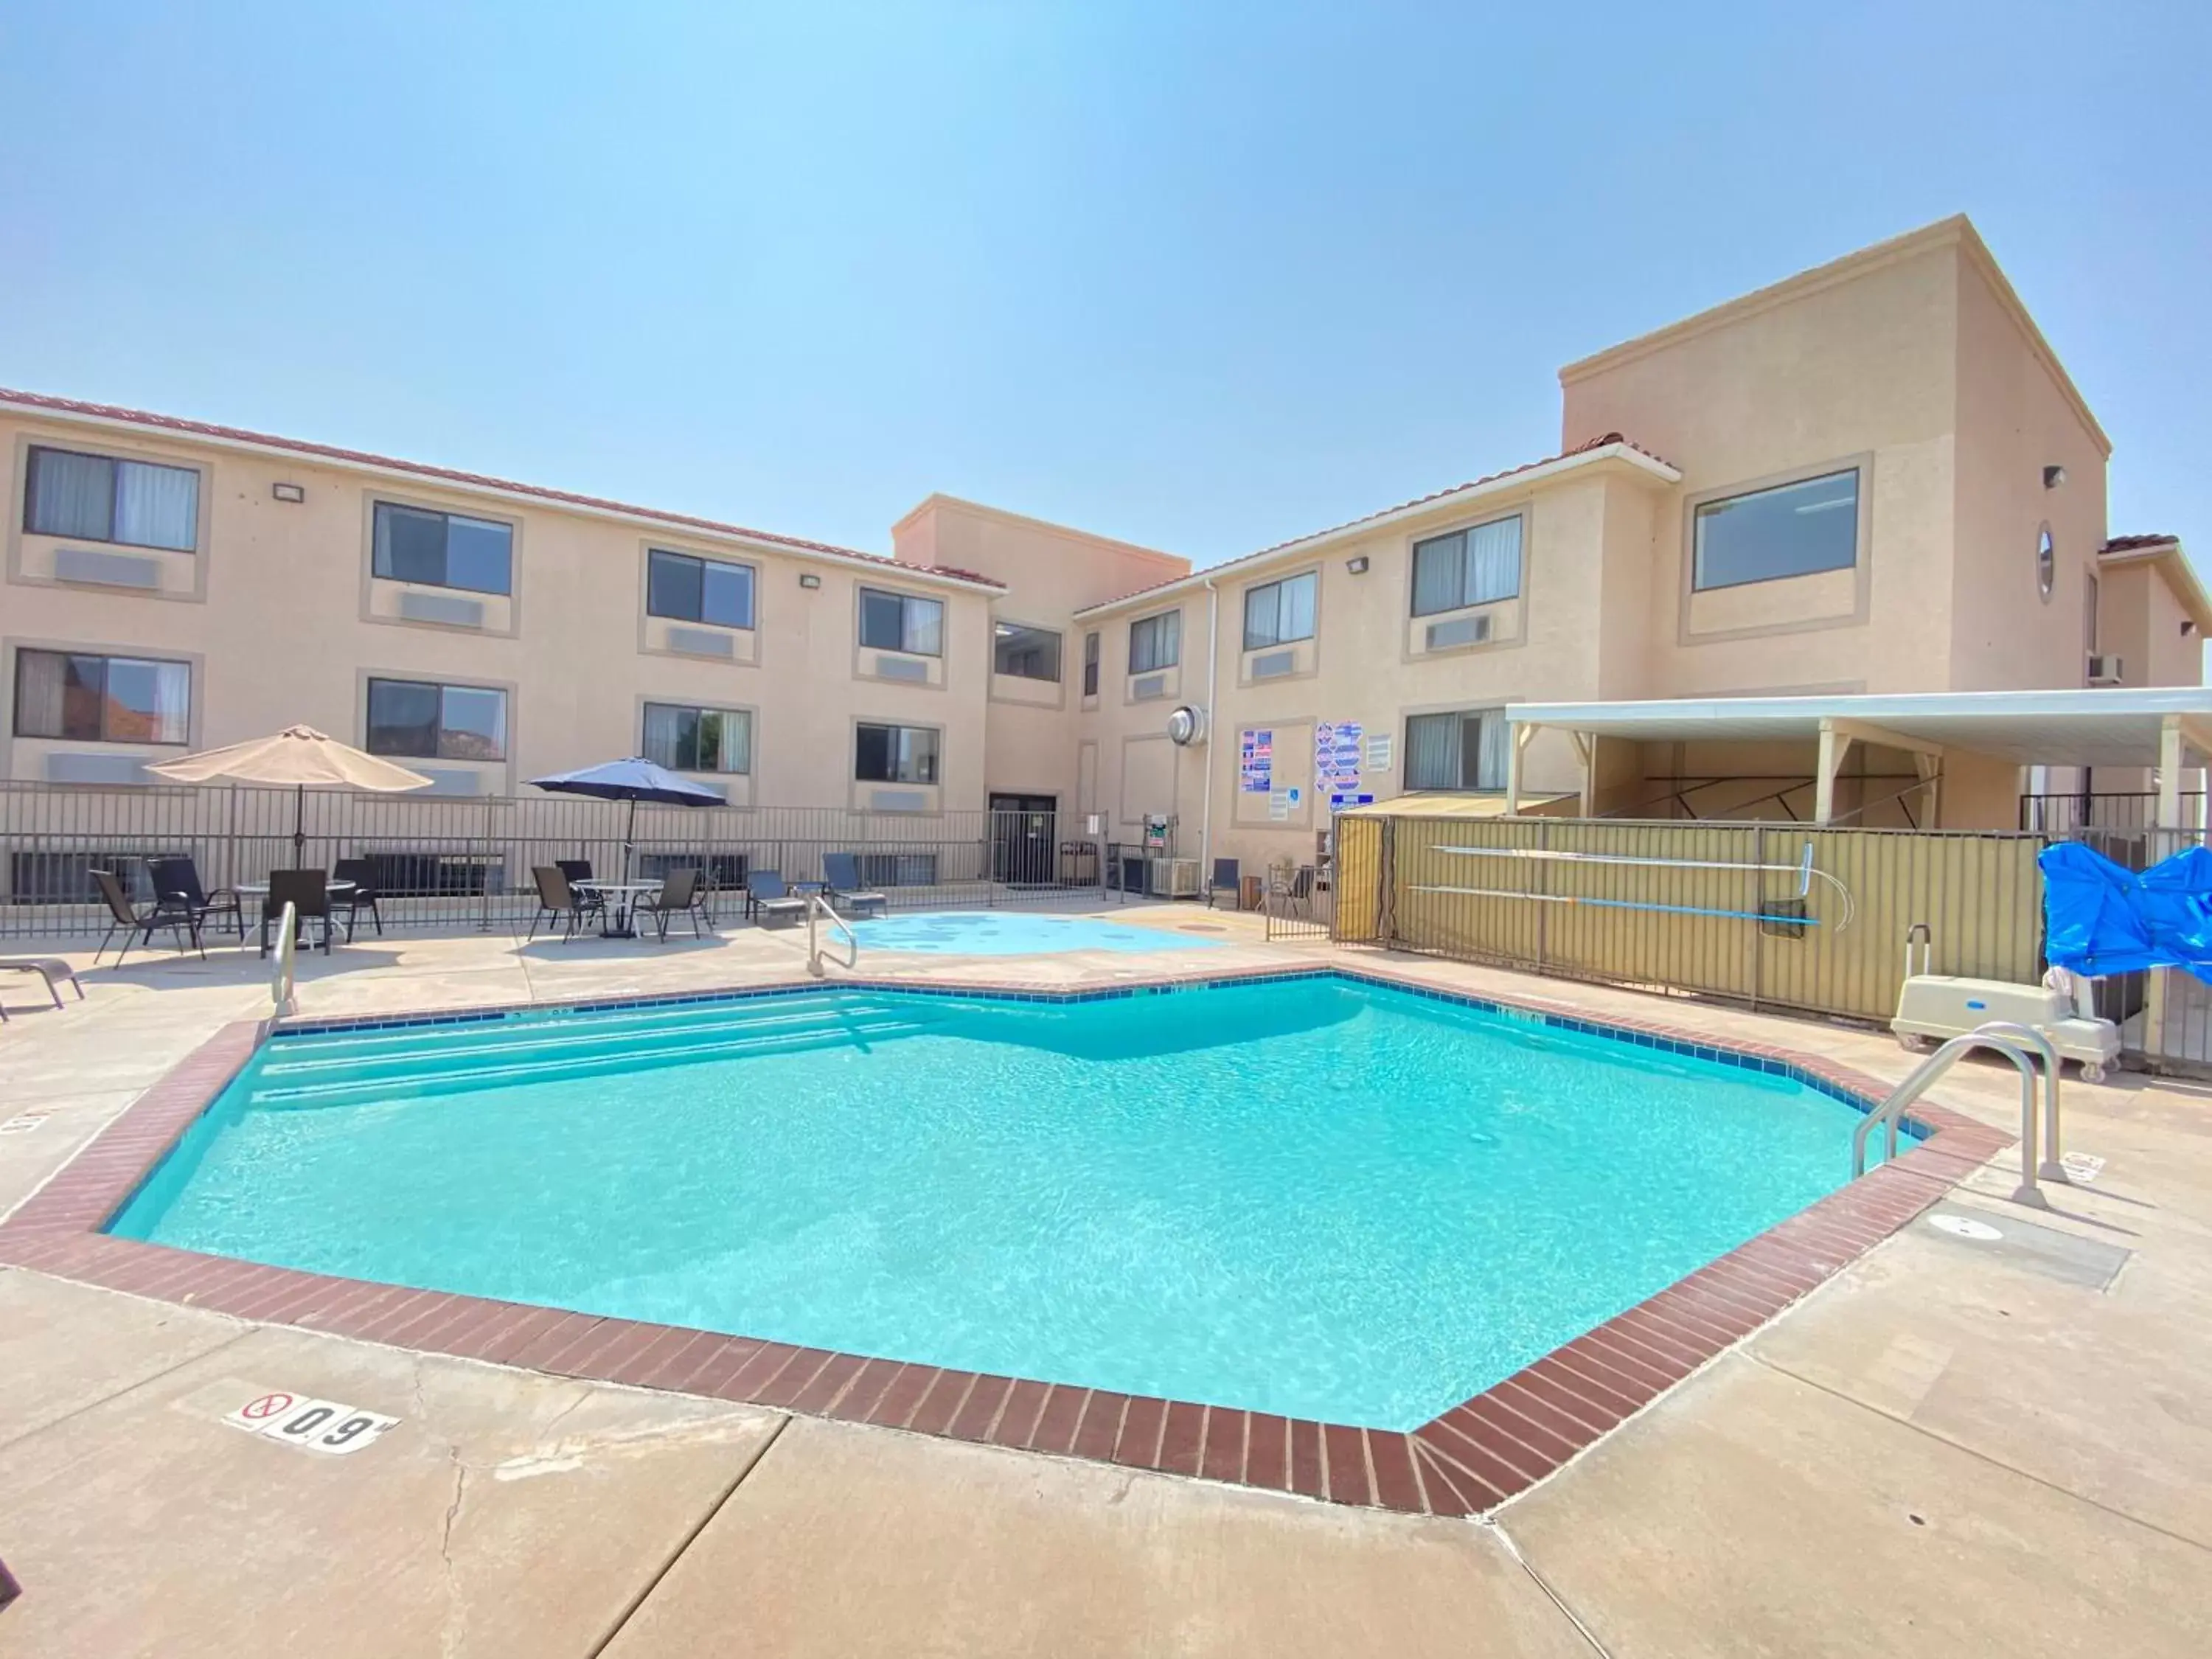 Swimming pool, Property Building in Quality Inn Kanab National Park Area